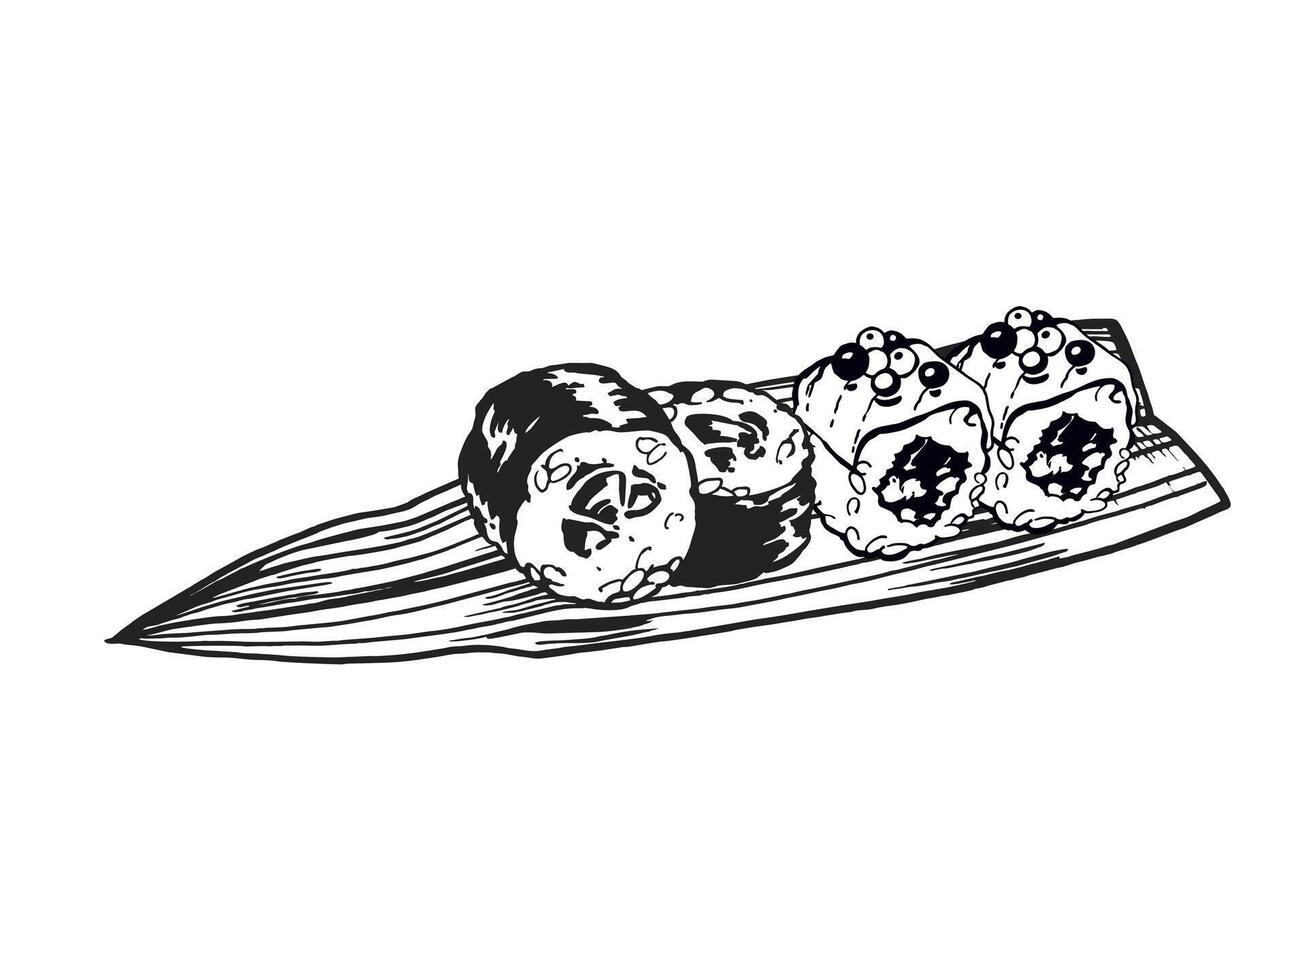 vector illustration of Japanese food theme with rolls, sushi, sashimi, wasabi and bamboo leaves, hand drawn inked monochrome sketch of seafood isolated on white background